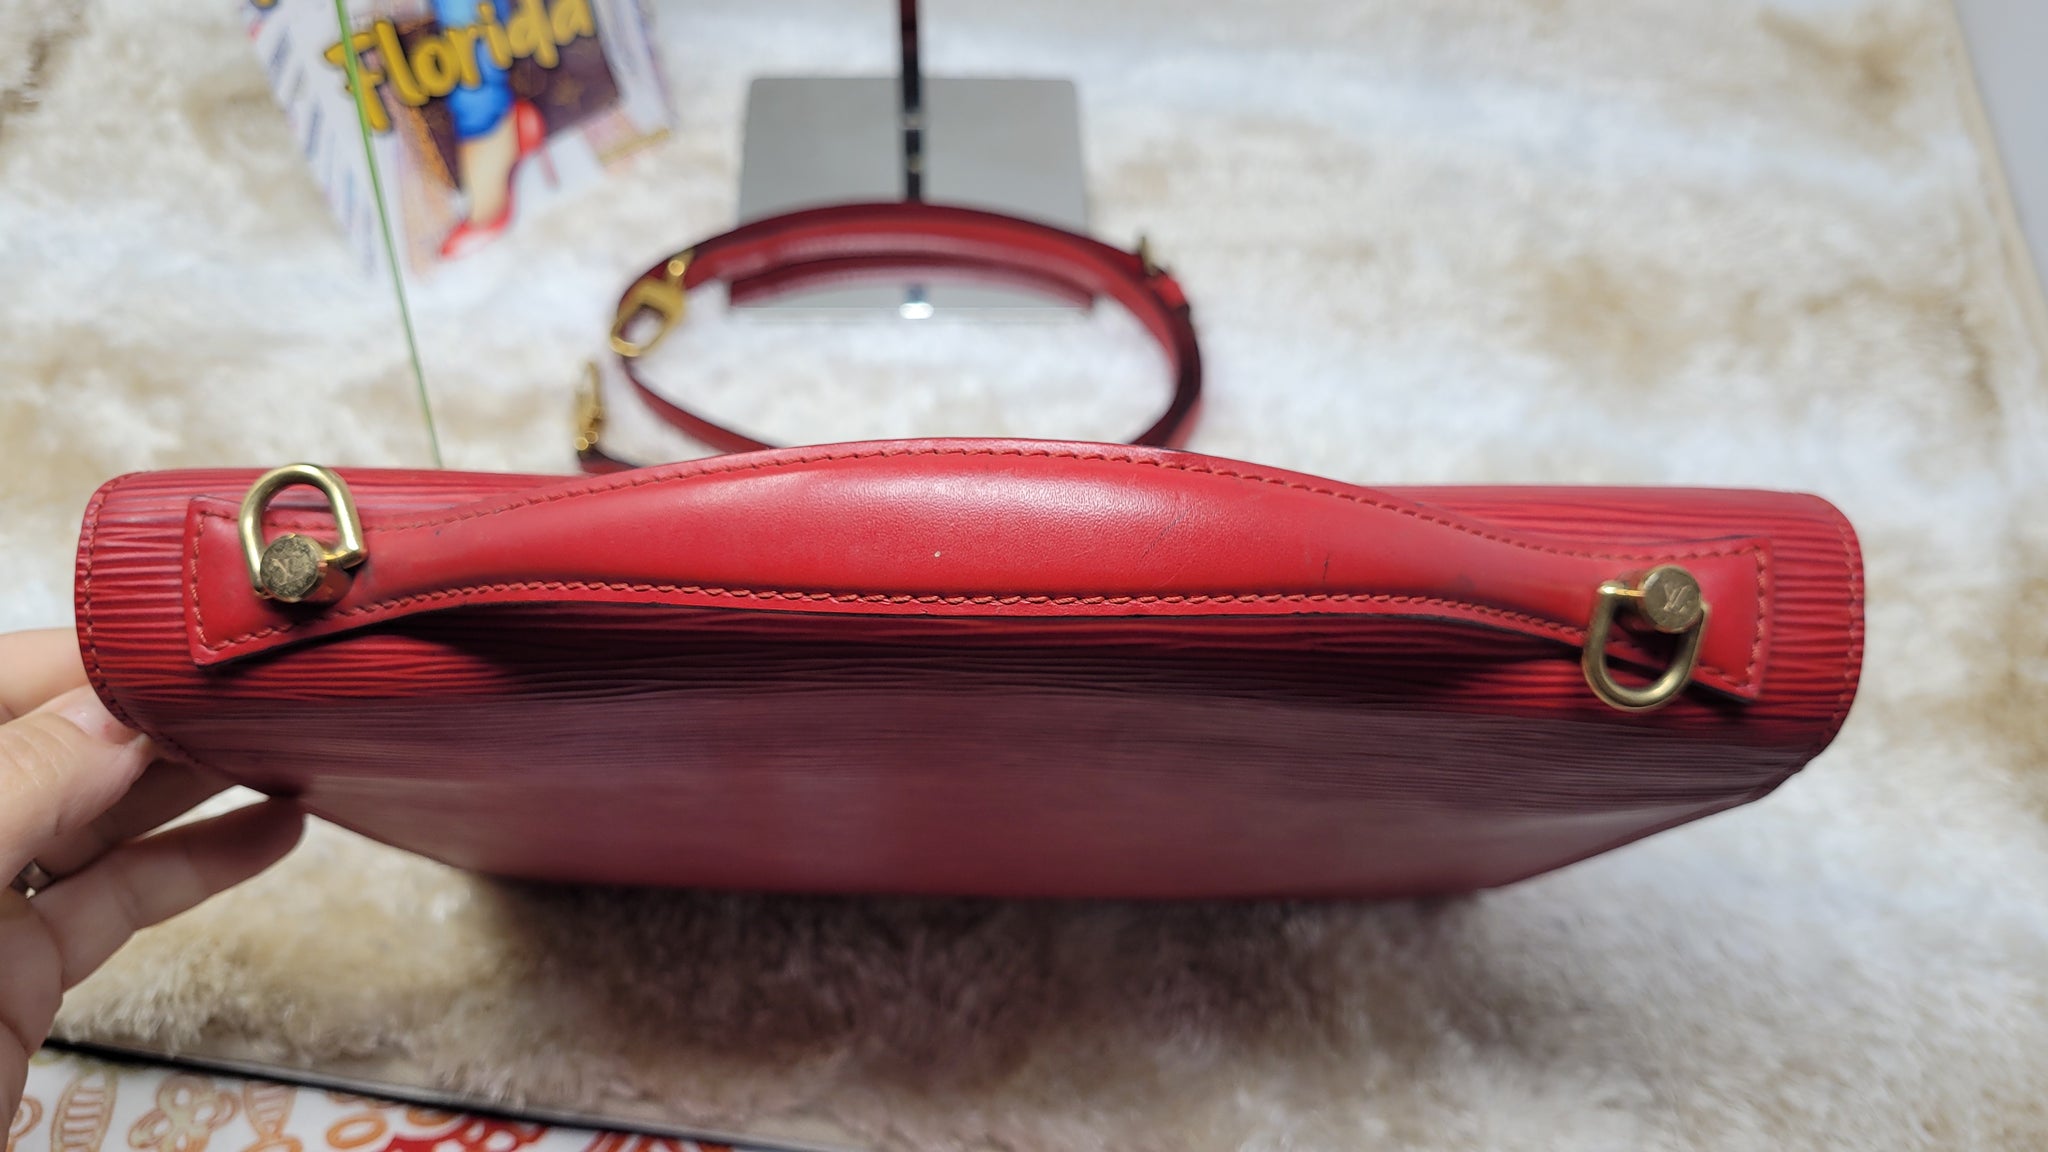 Used Louis Vuitton Monceau Epi Red/Leather/Red Bag